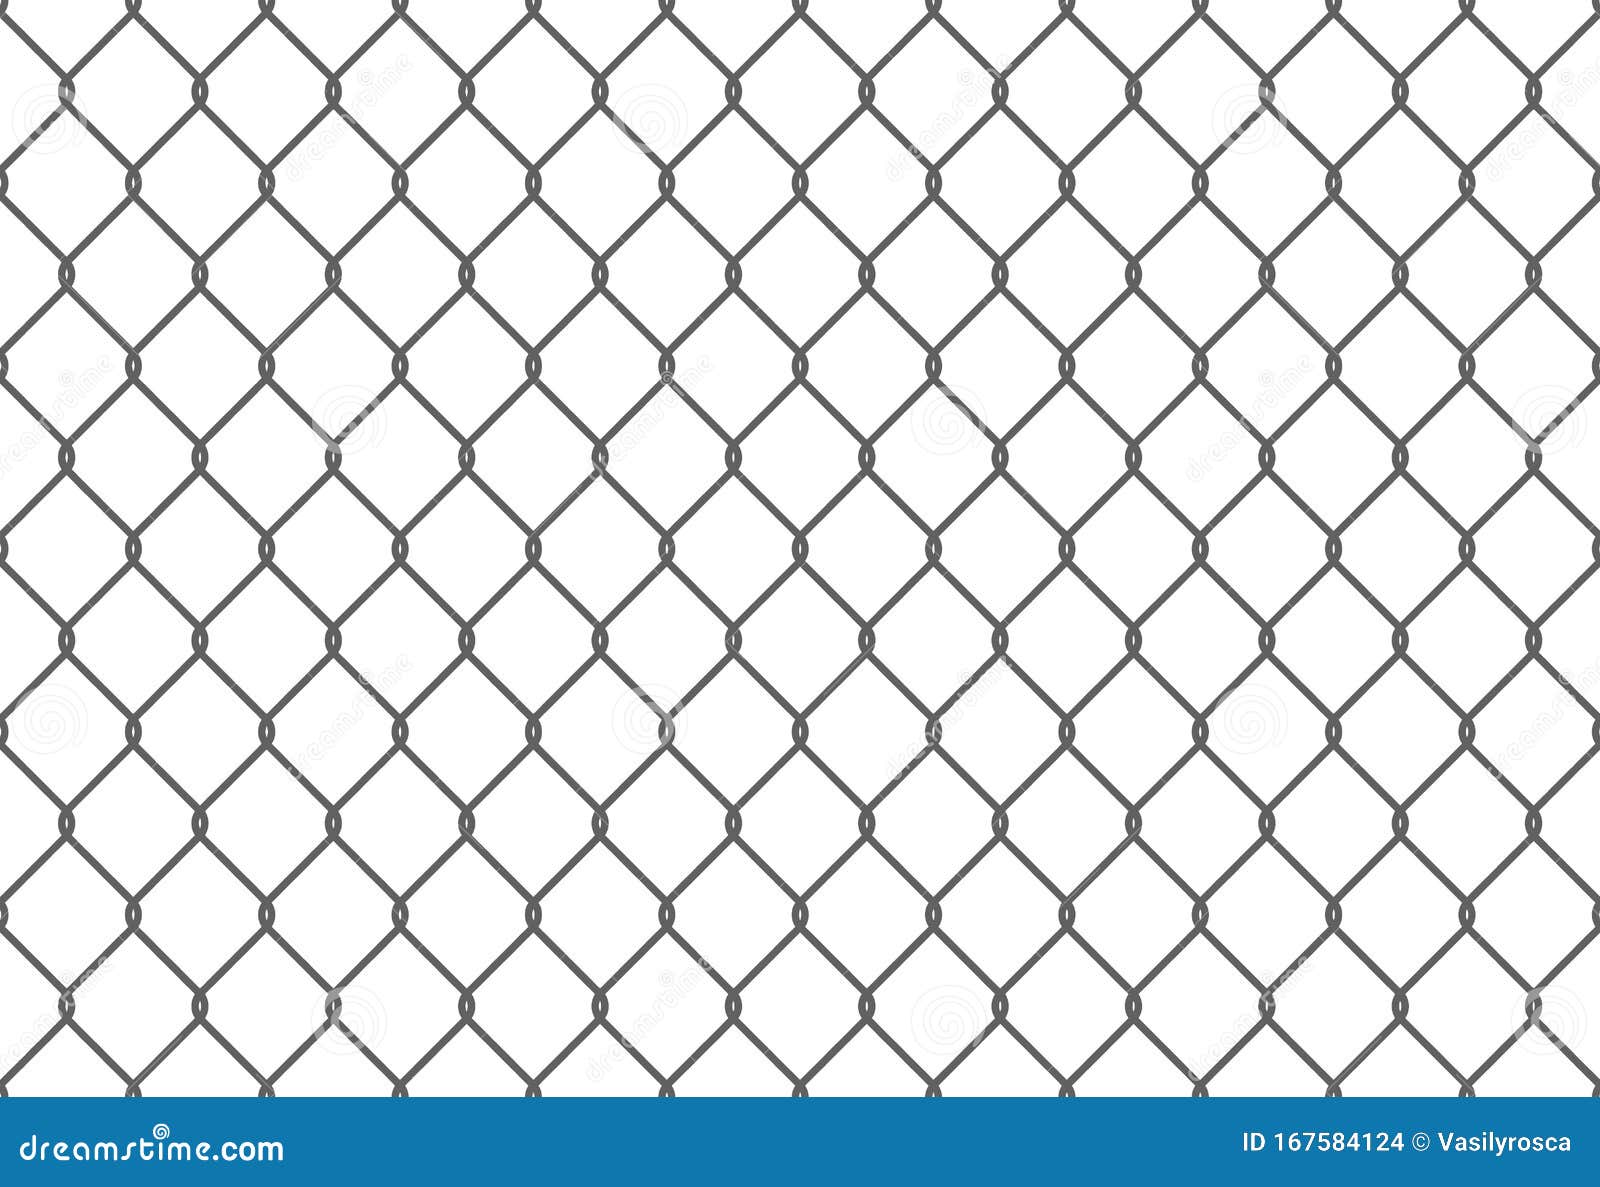 seamless metal chain link fence. wire  fence pattern texture background